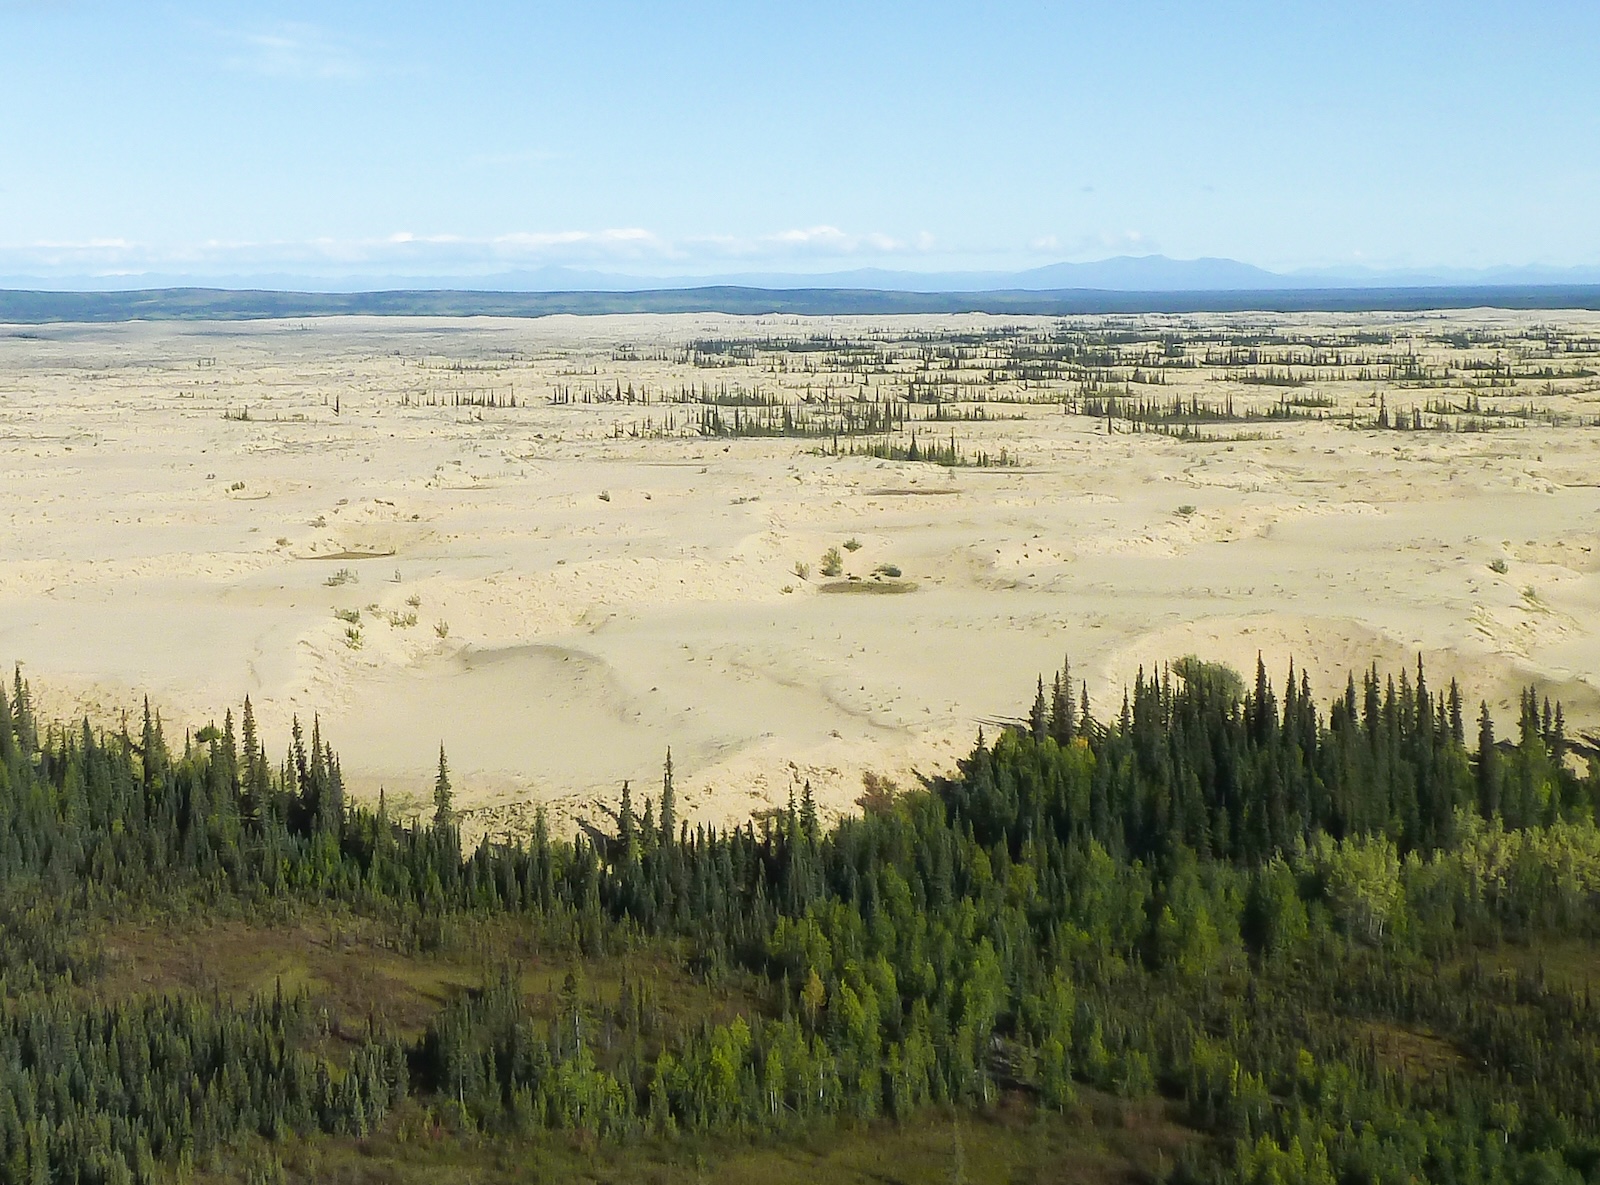 From a foreground of mixed spruce and birch forest, an expanse of yellow sand stretches away into the distance. Patches of spruce dot the sand dunes. Rolling hills and mountains rise on the far horizon under a blue sky.